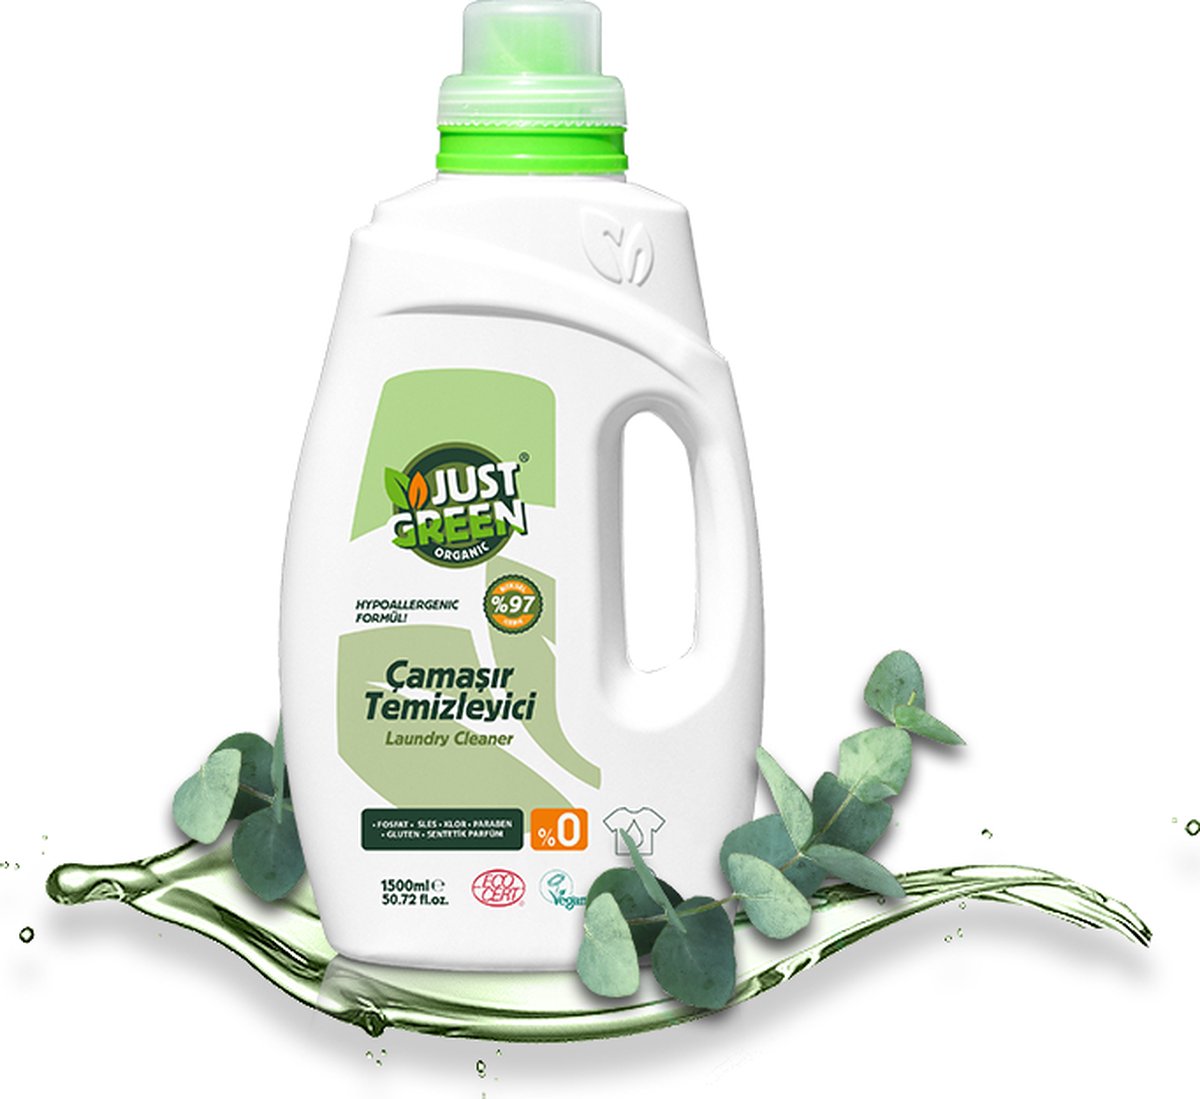 Just Green Organic Laundry Liquid 1500ml, Non-Toxic Formula, Vegan & Eco-Friendly Washing Liquid Detergent, Safe Baby Detergent, Recyclable Packaging